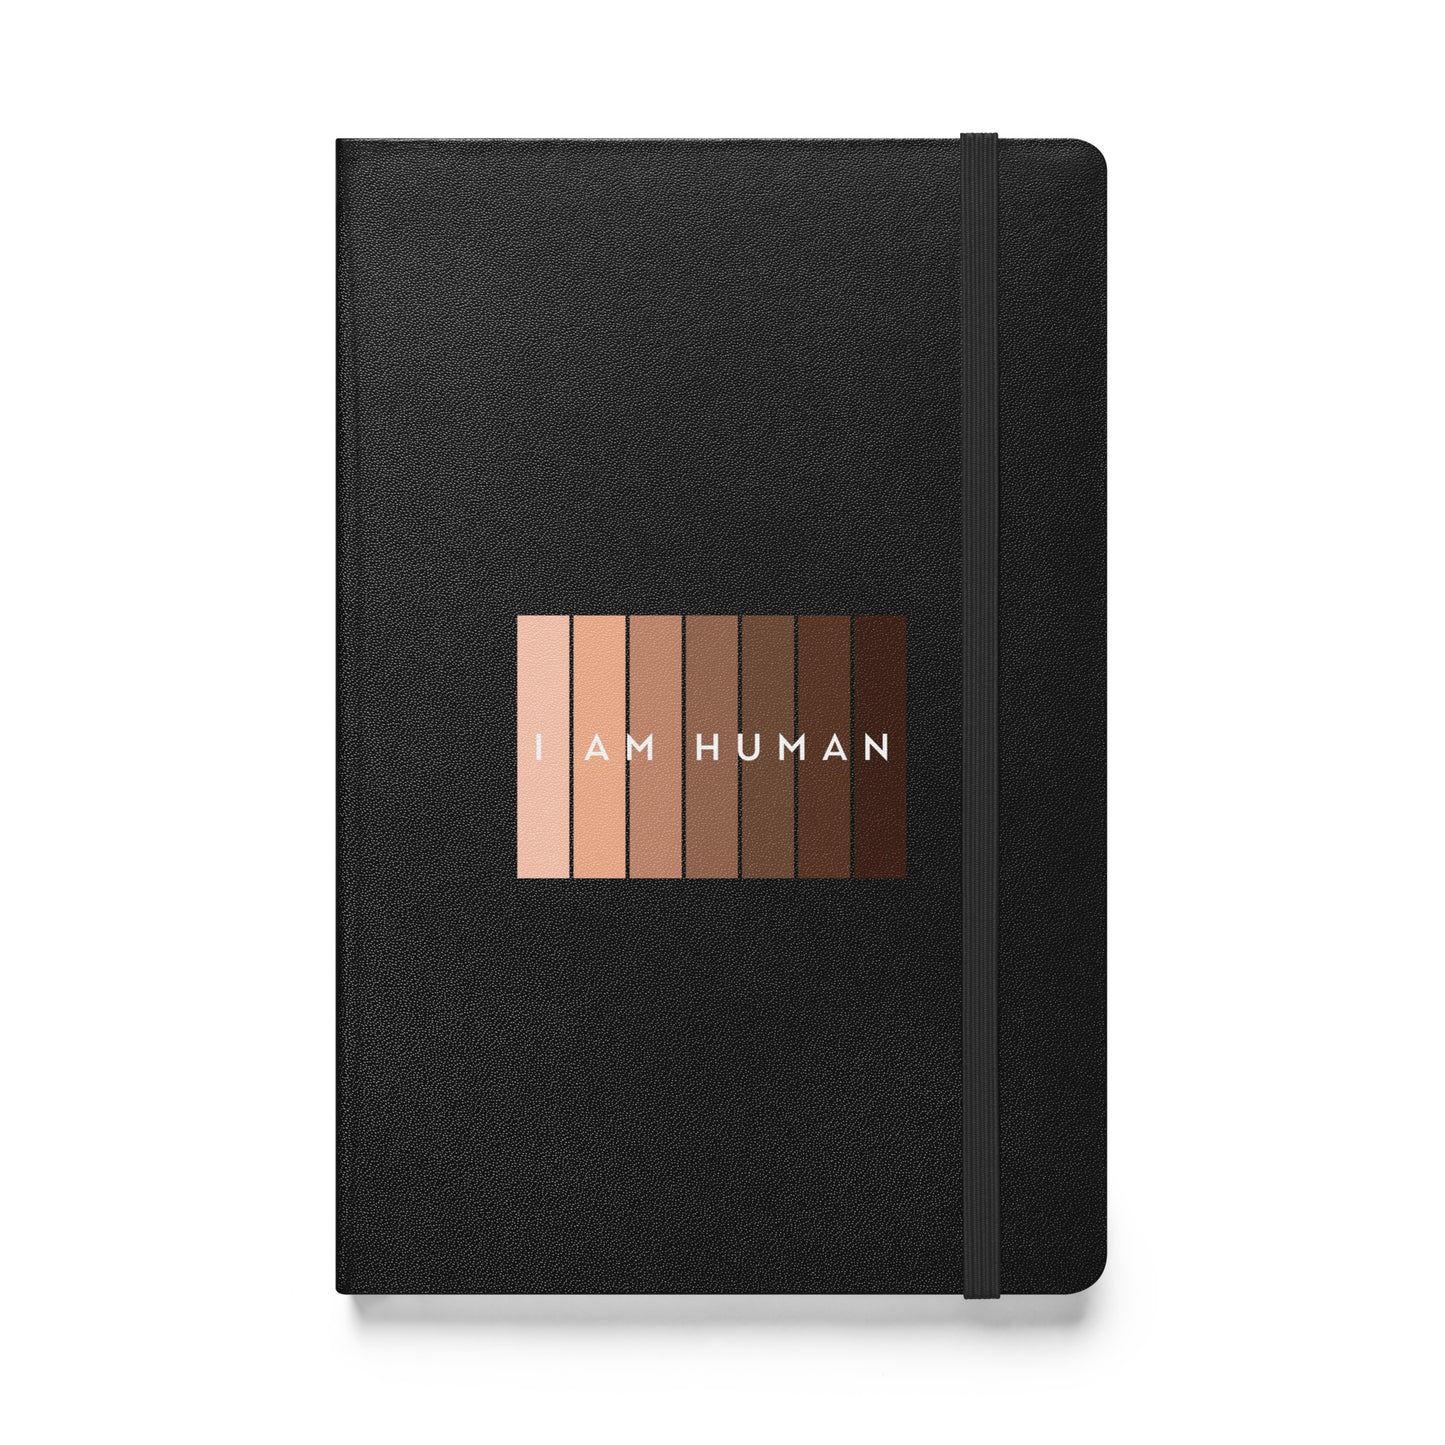 I Am Human Hardcover bound notebook